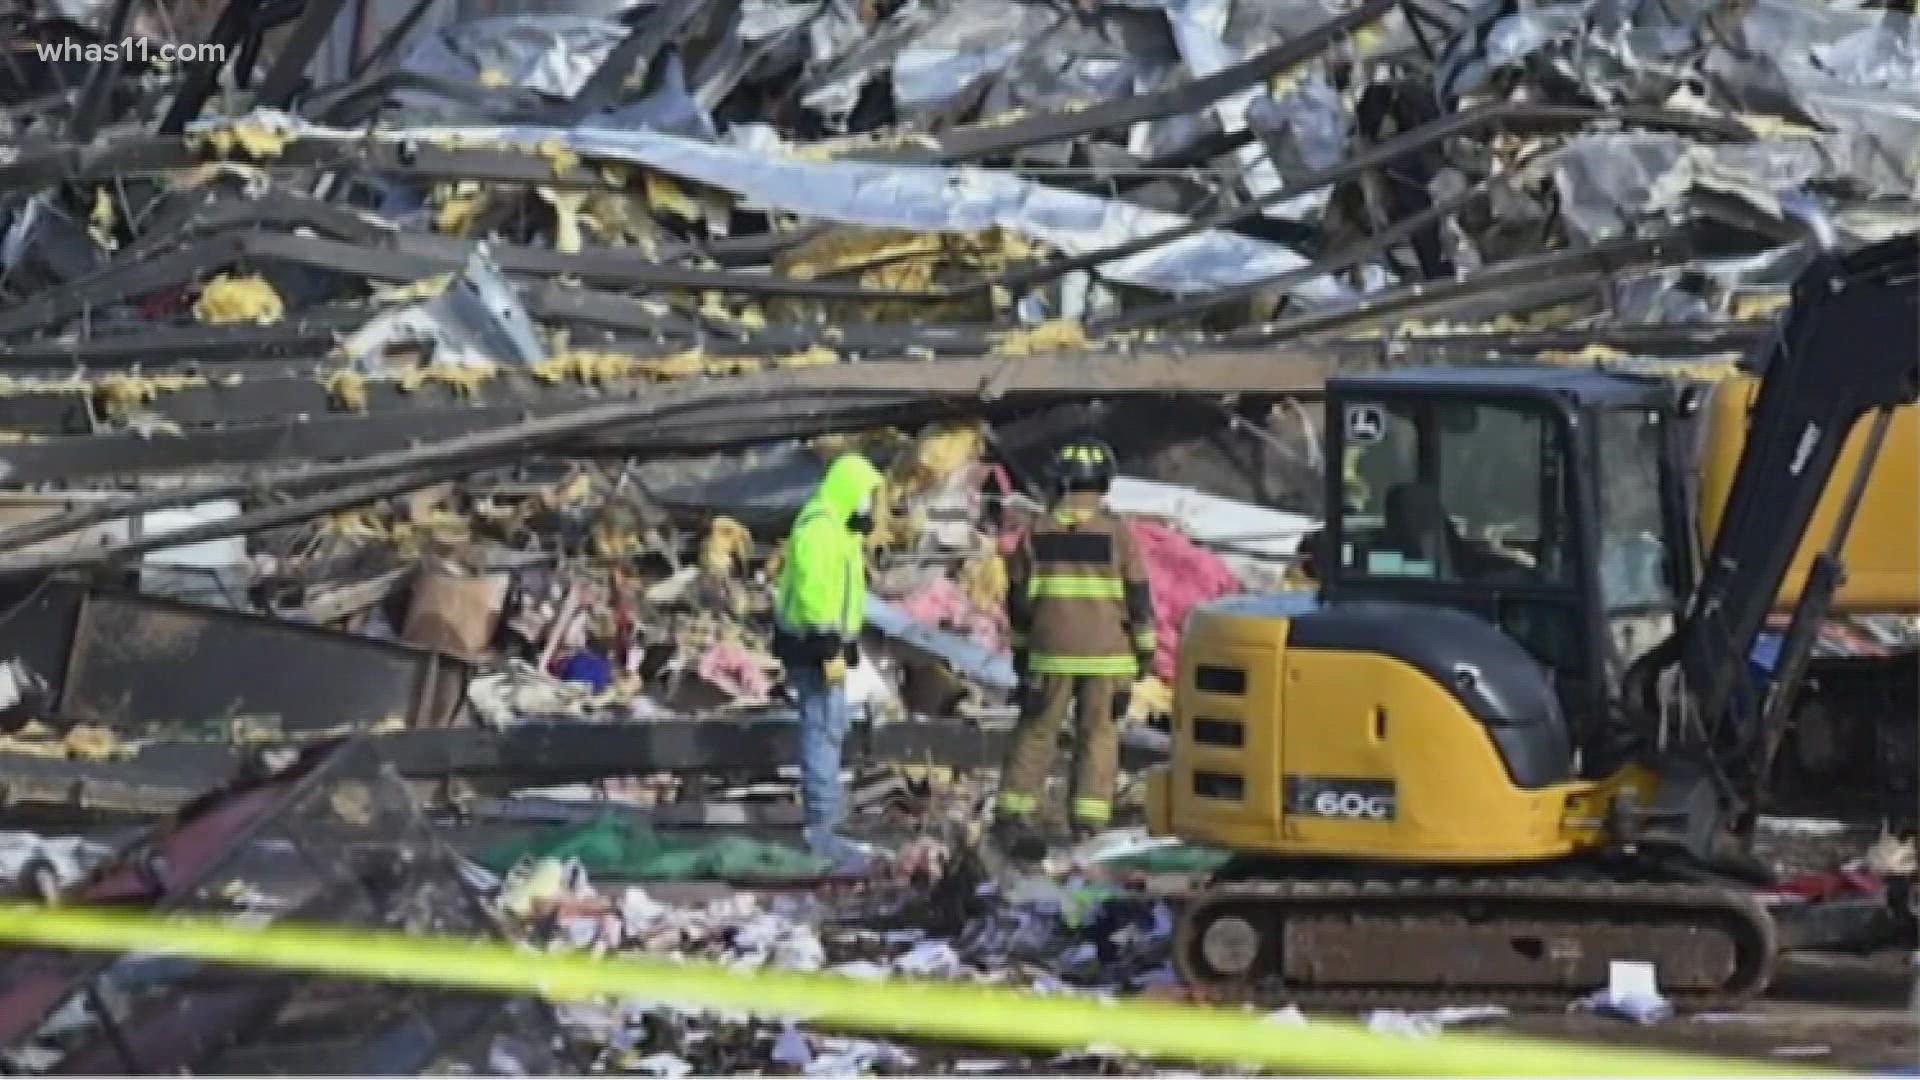 State officials say they are still working to verify those numbers at Mayfield Consumer Products. The company was destroyed after a tornado Friday night.